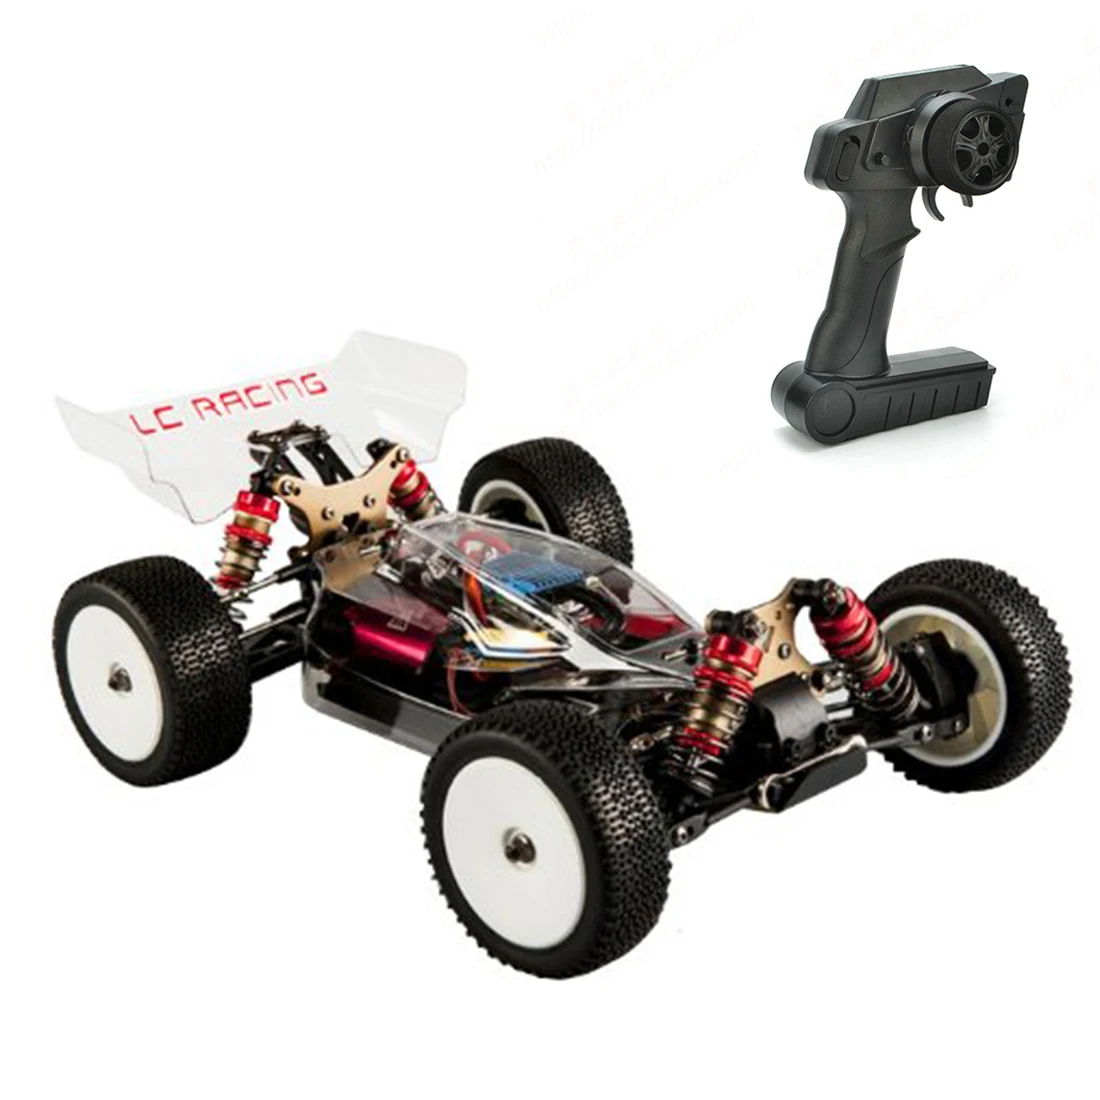 

LC Racing EMB-1H 1:14 50+KM/H 2.4G 4WD Brushless Remote Control Racing Drifting Off Road Vehicle Model Toy - RTR Version